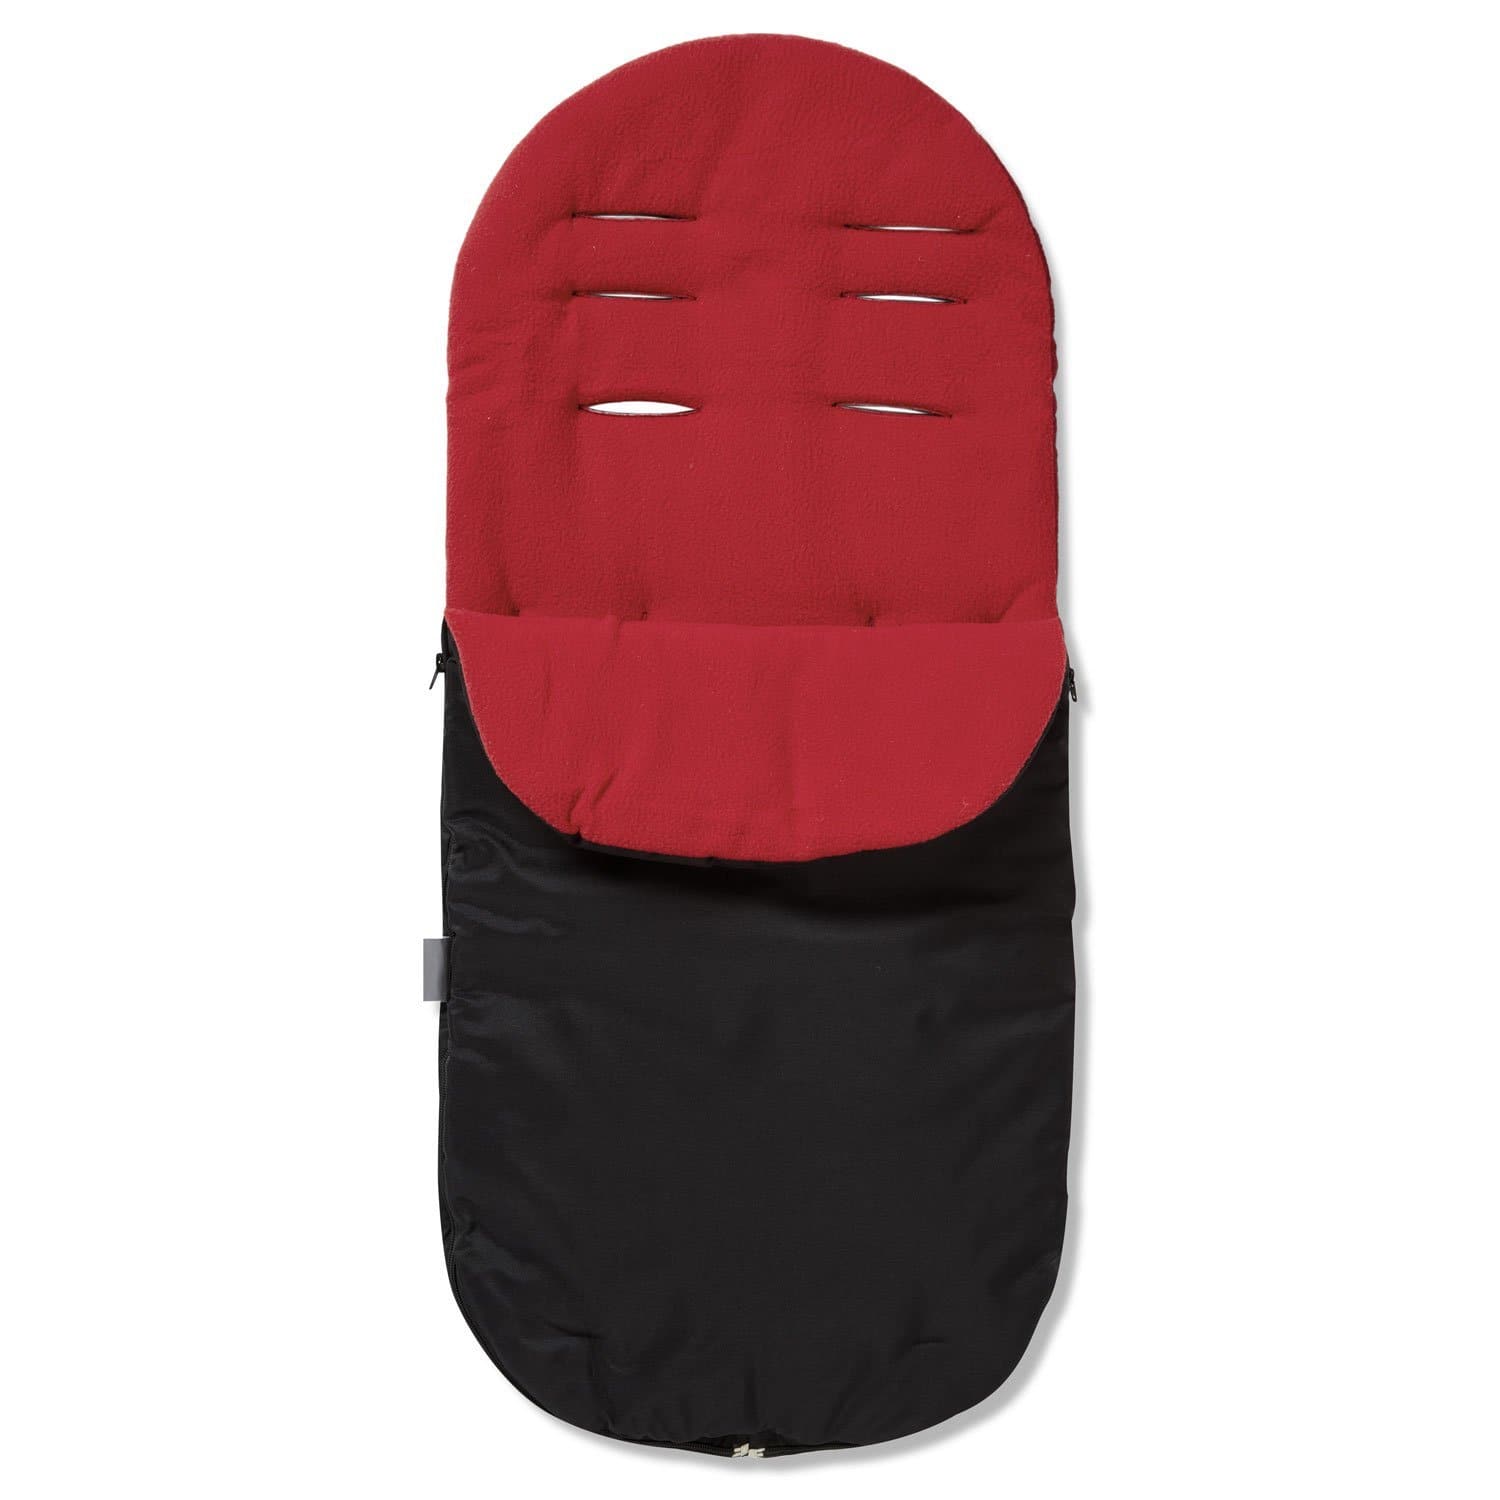 Footmuff / Cosy Toes Compatible with Safety 1st - Red / Fits All Models | For Your Little One